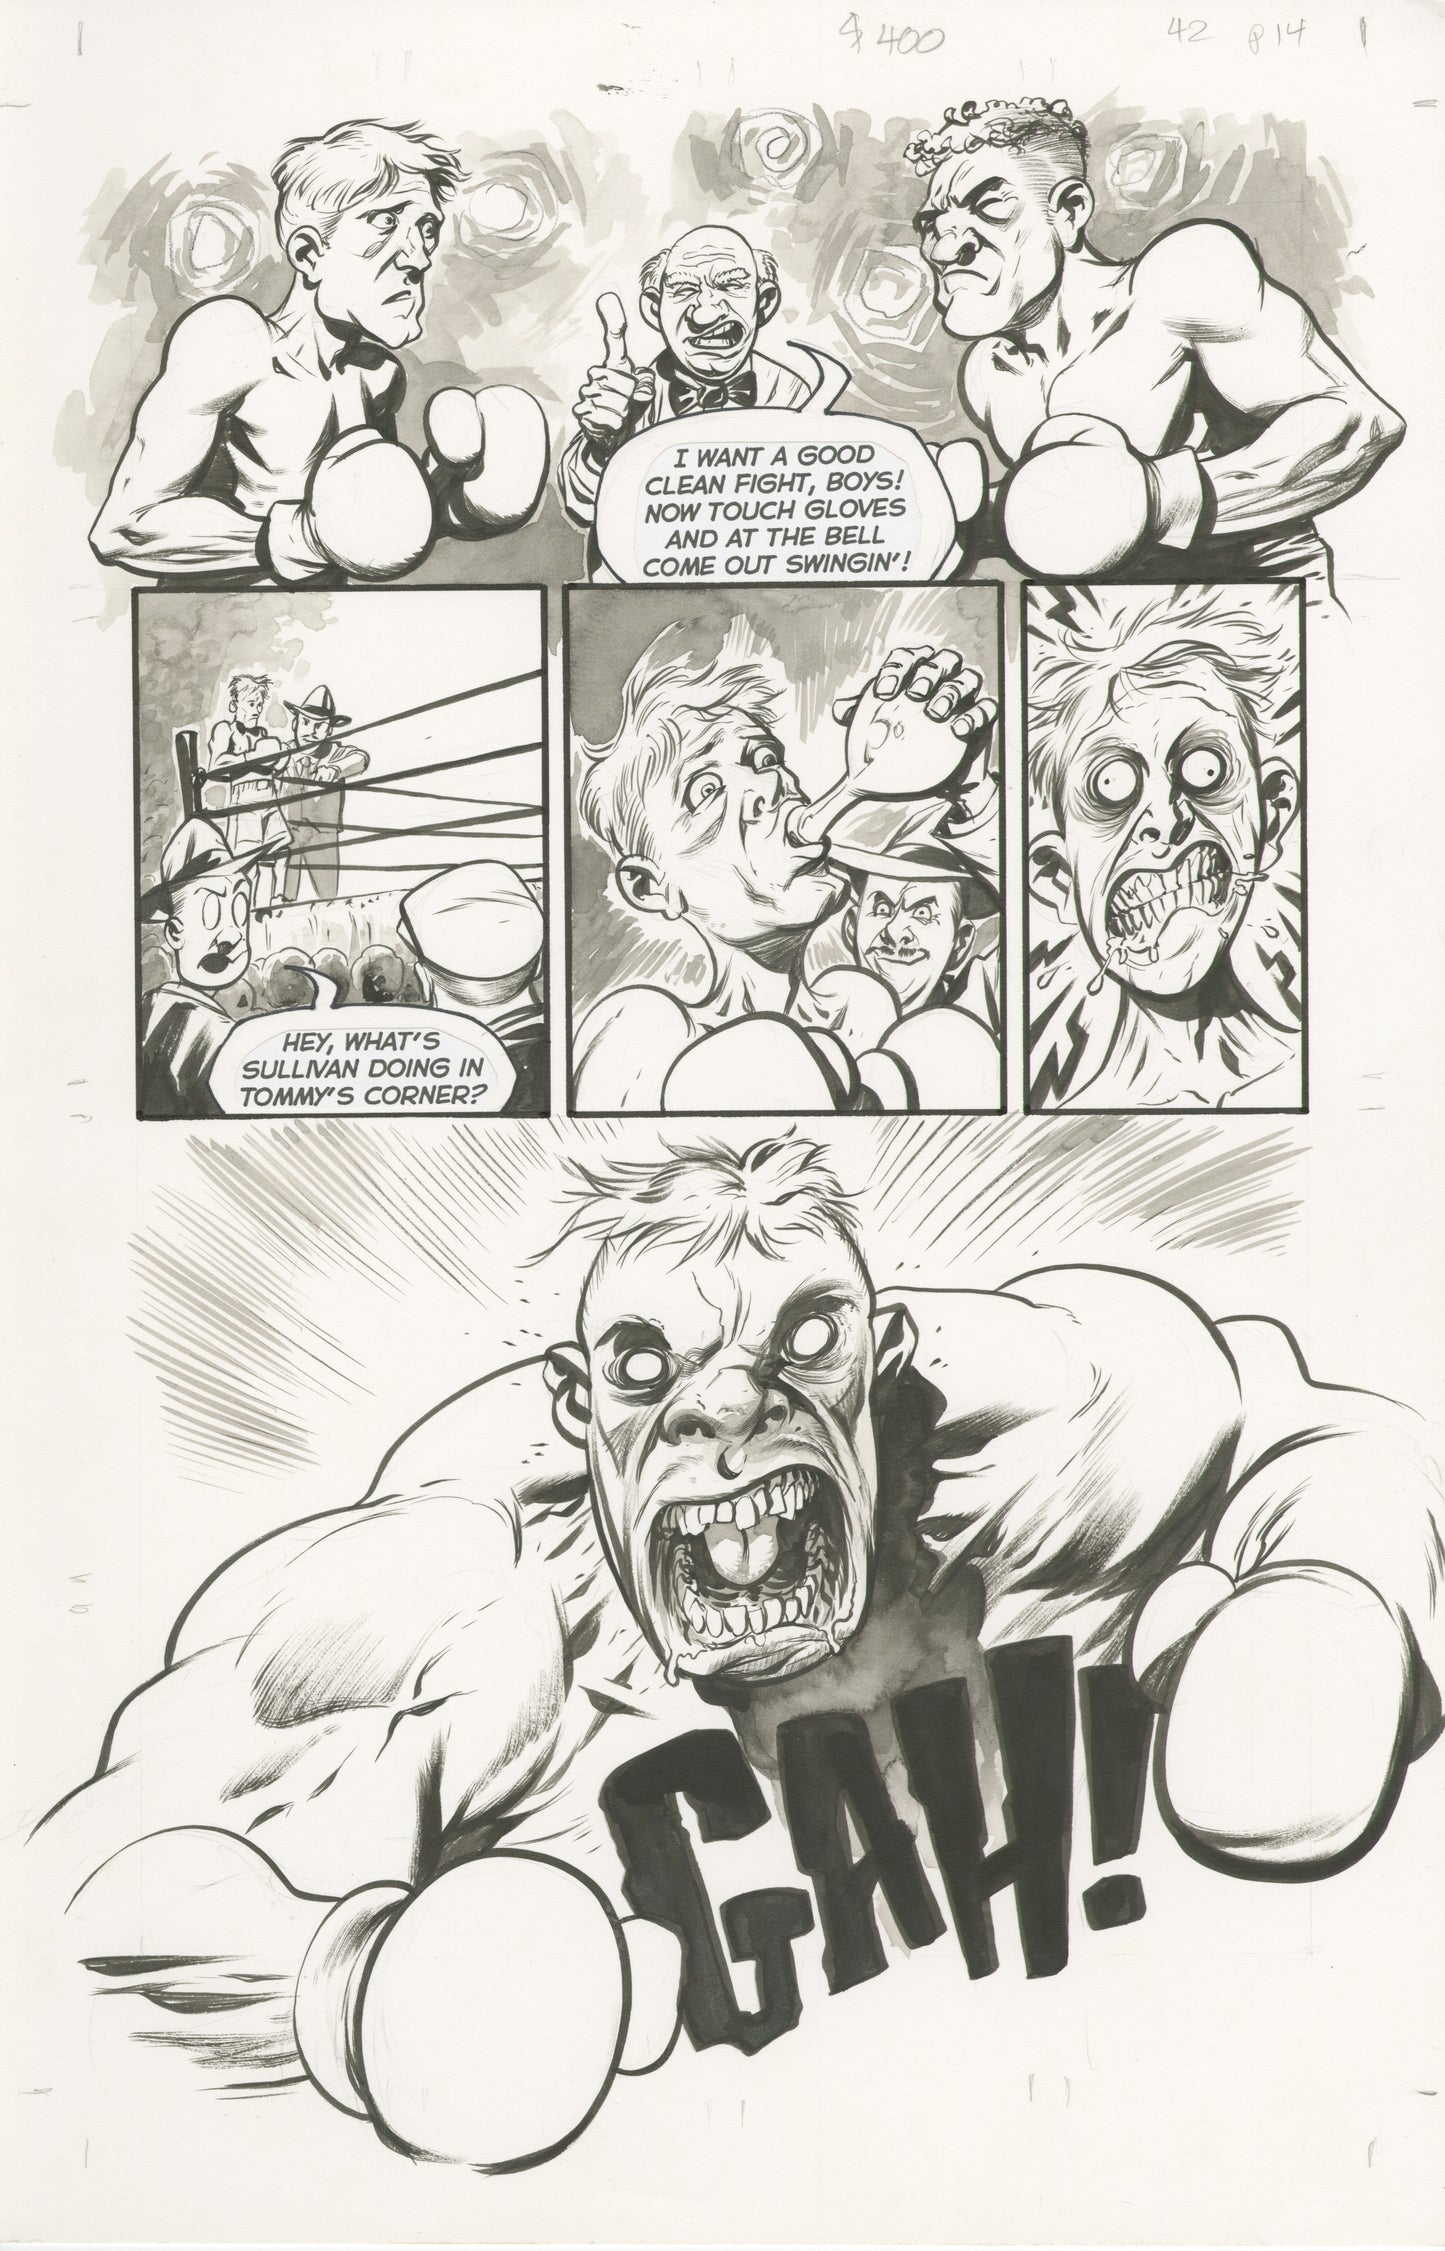 The Goon #42, page #14